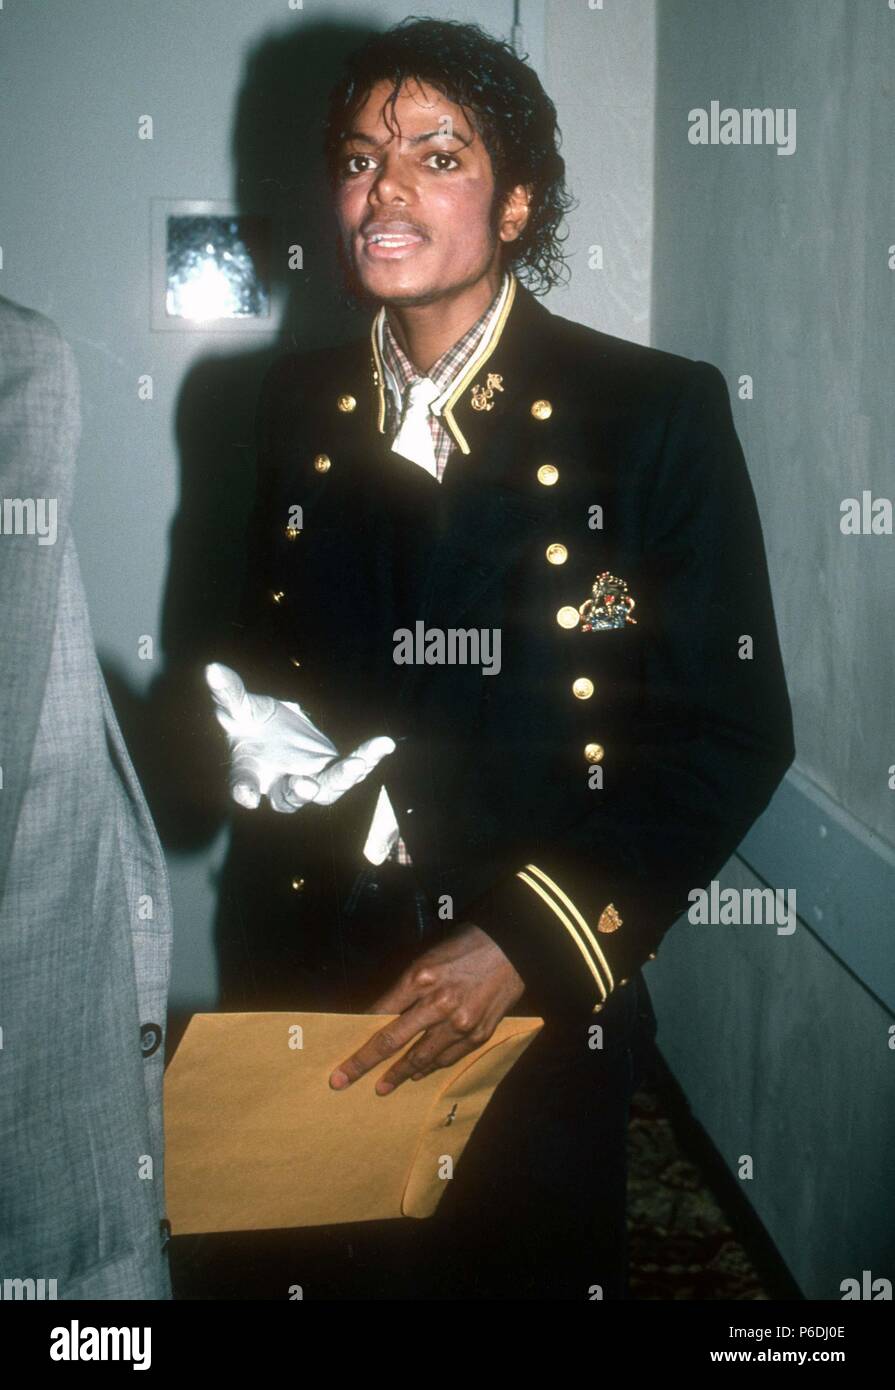 MICHAEL JACKSON 1984 A DIFFERENT LOOK 1xRARE8x10 PHOTO 